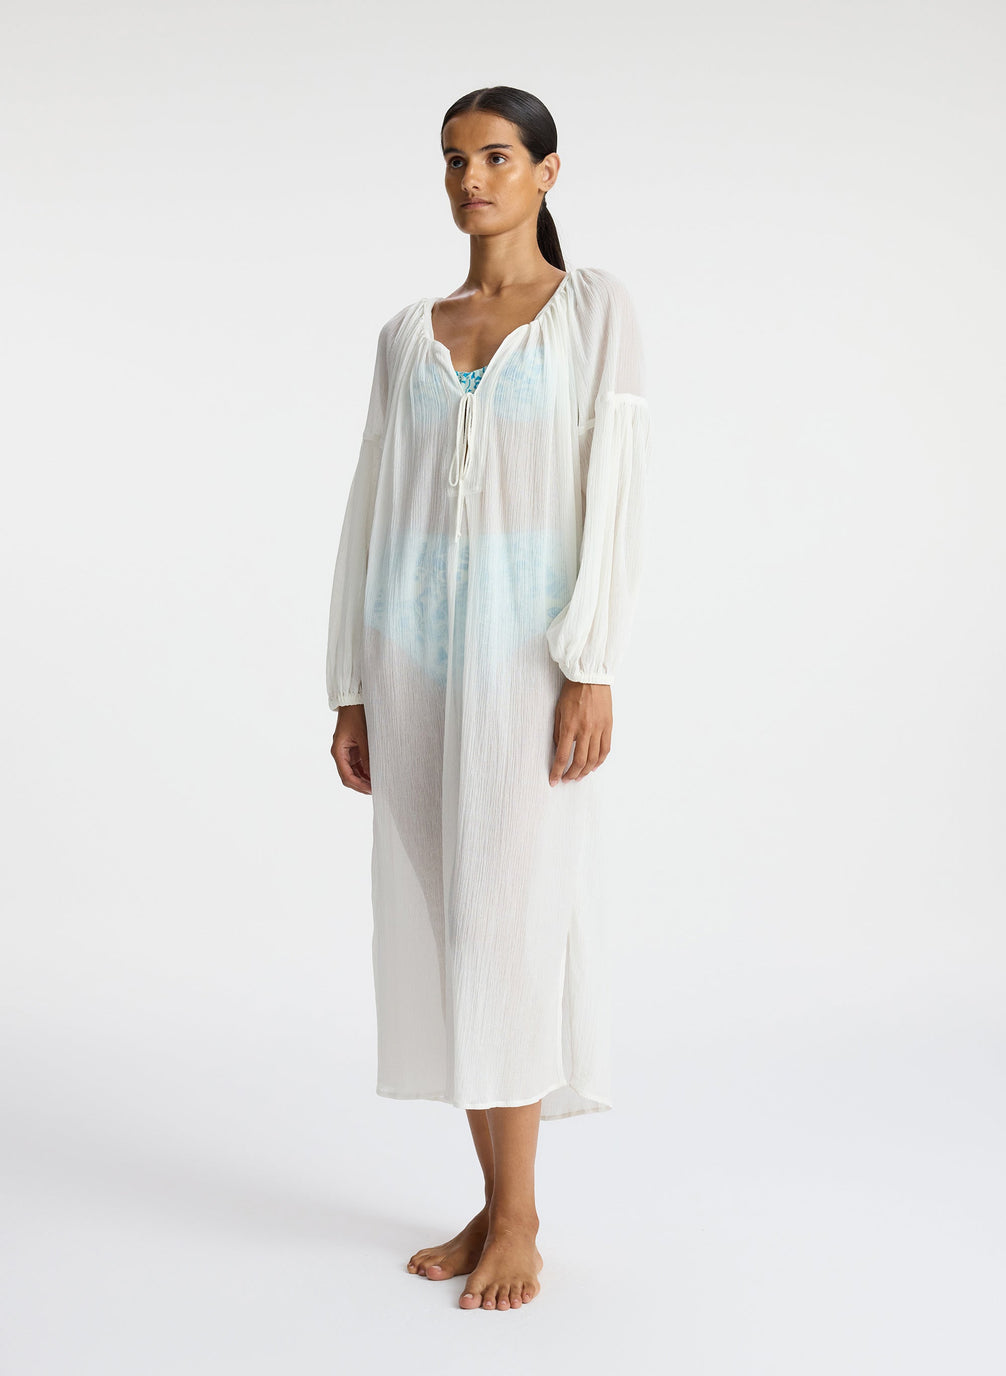 side view of woman wearing white sheer swim cover up dress